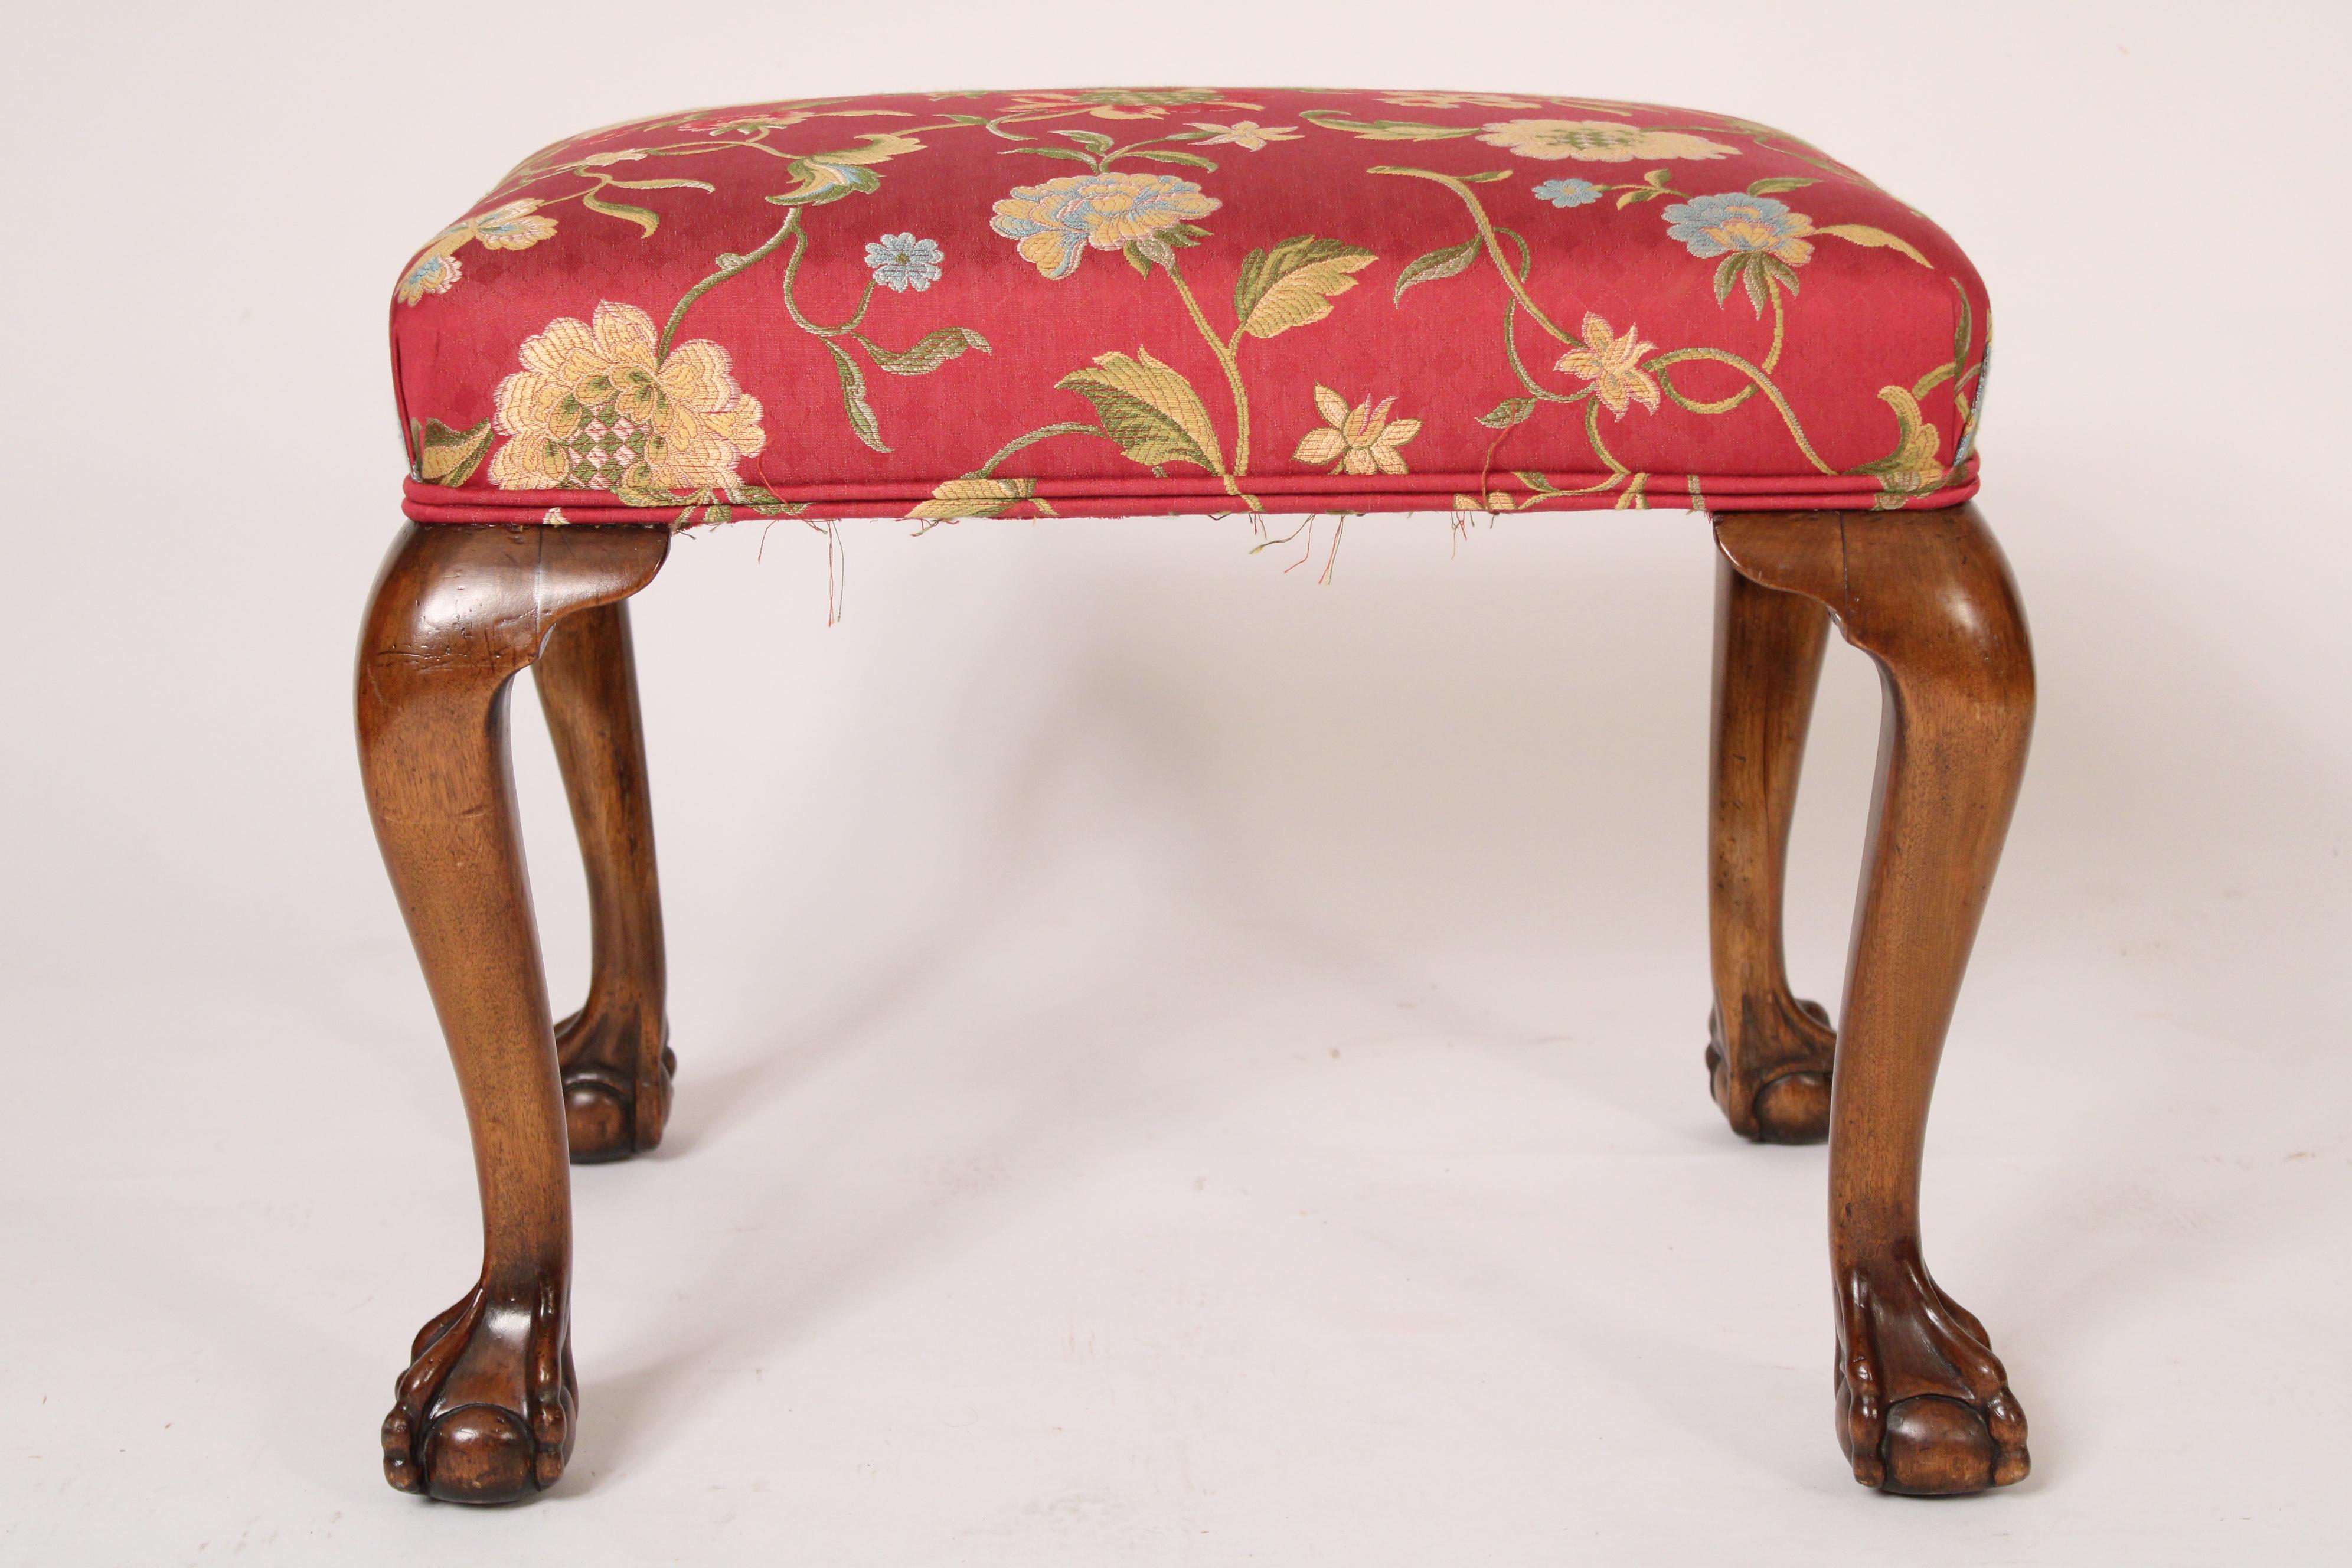 Antique George II style mahogany bench, late 19th century. With a recently reupholstered floral desig1300 seat resting on cabriole legs ending in ball and claw feet.